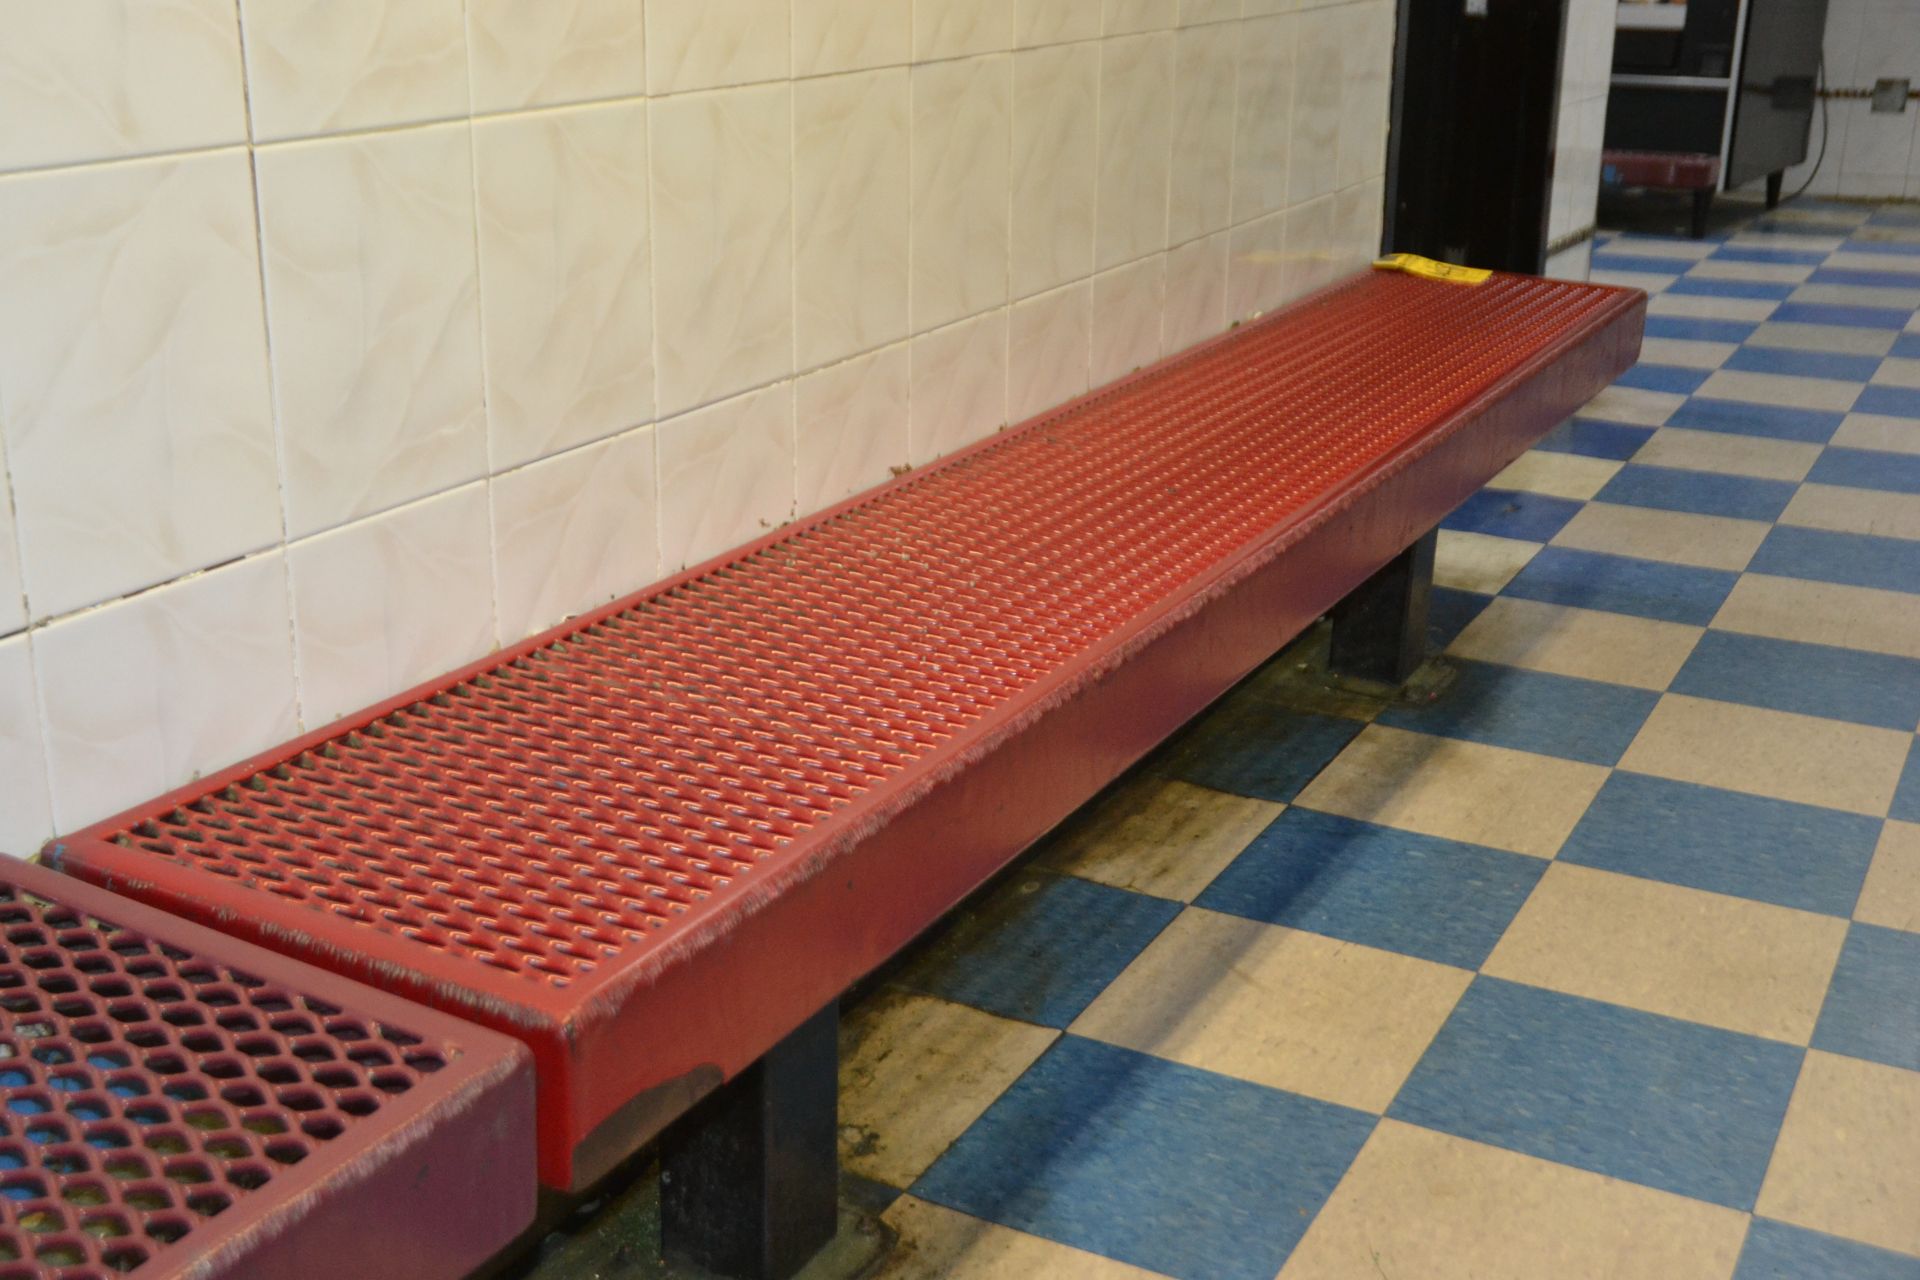 Metal Coated 8' Benches - Image 2 of 2